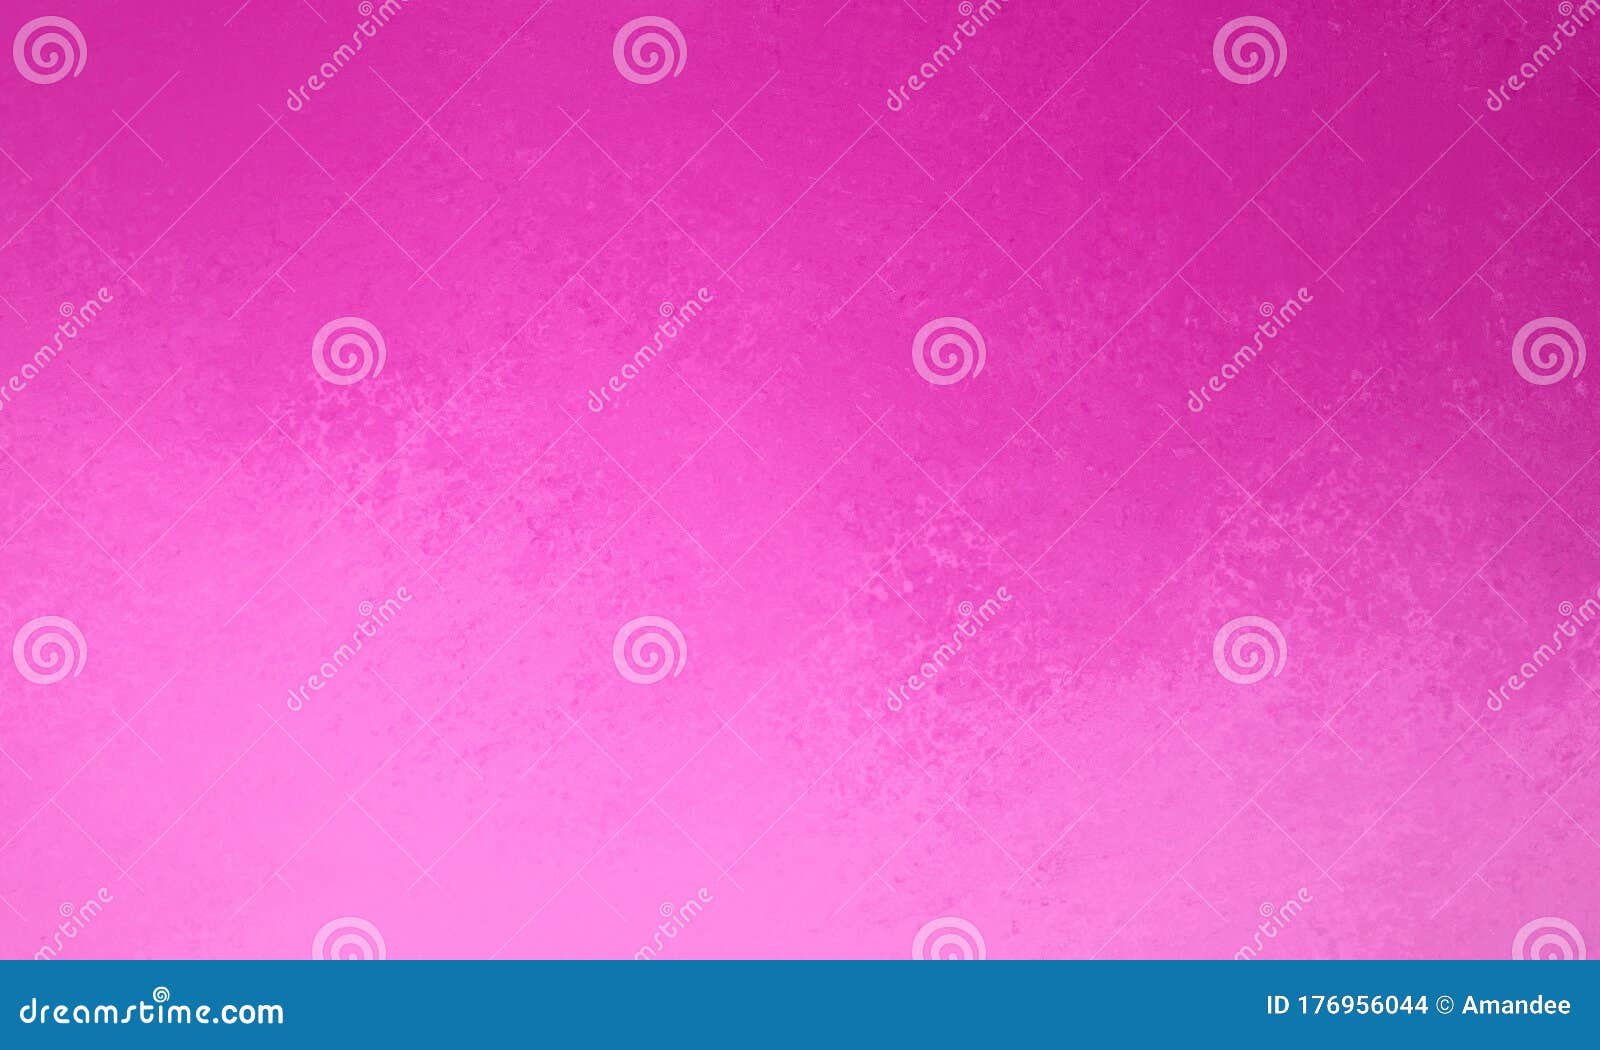 hot pink background with gradient colors of pastel pink and hot pink with dark grunge textured border, bright pretty abstract fuch